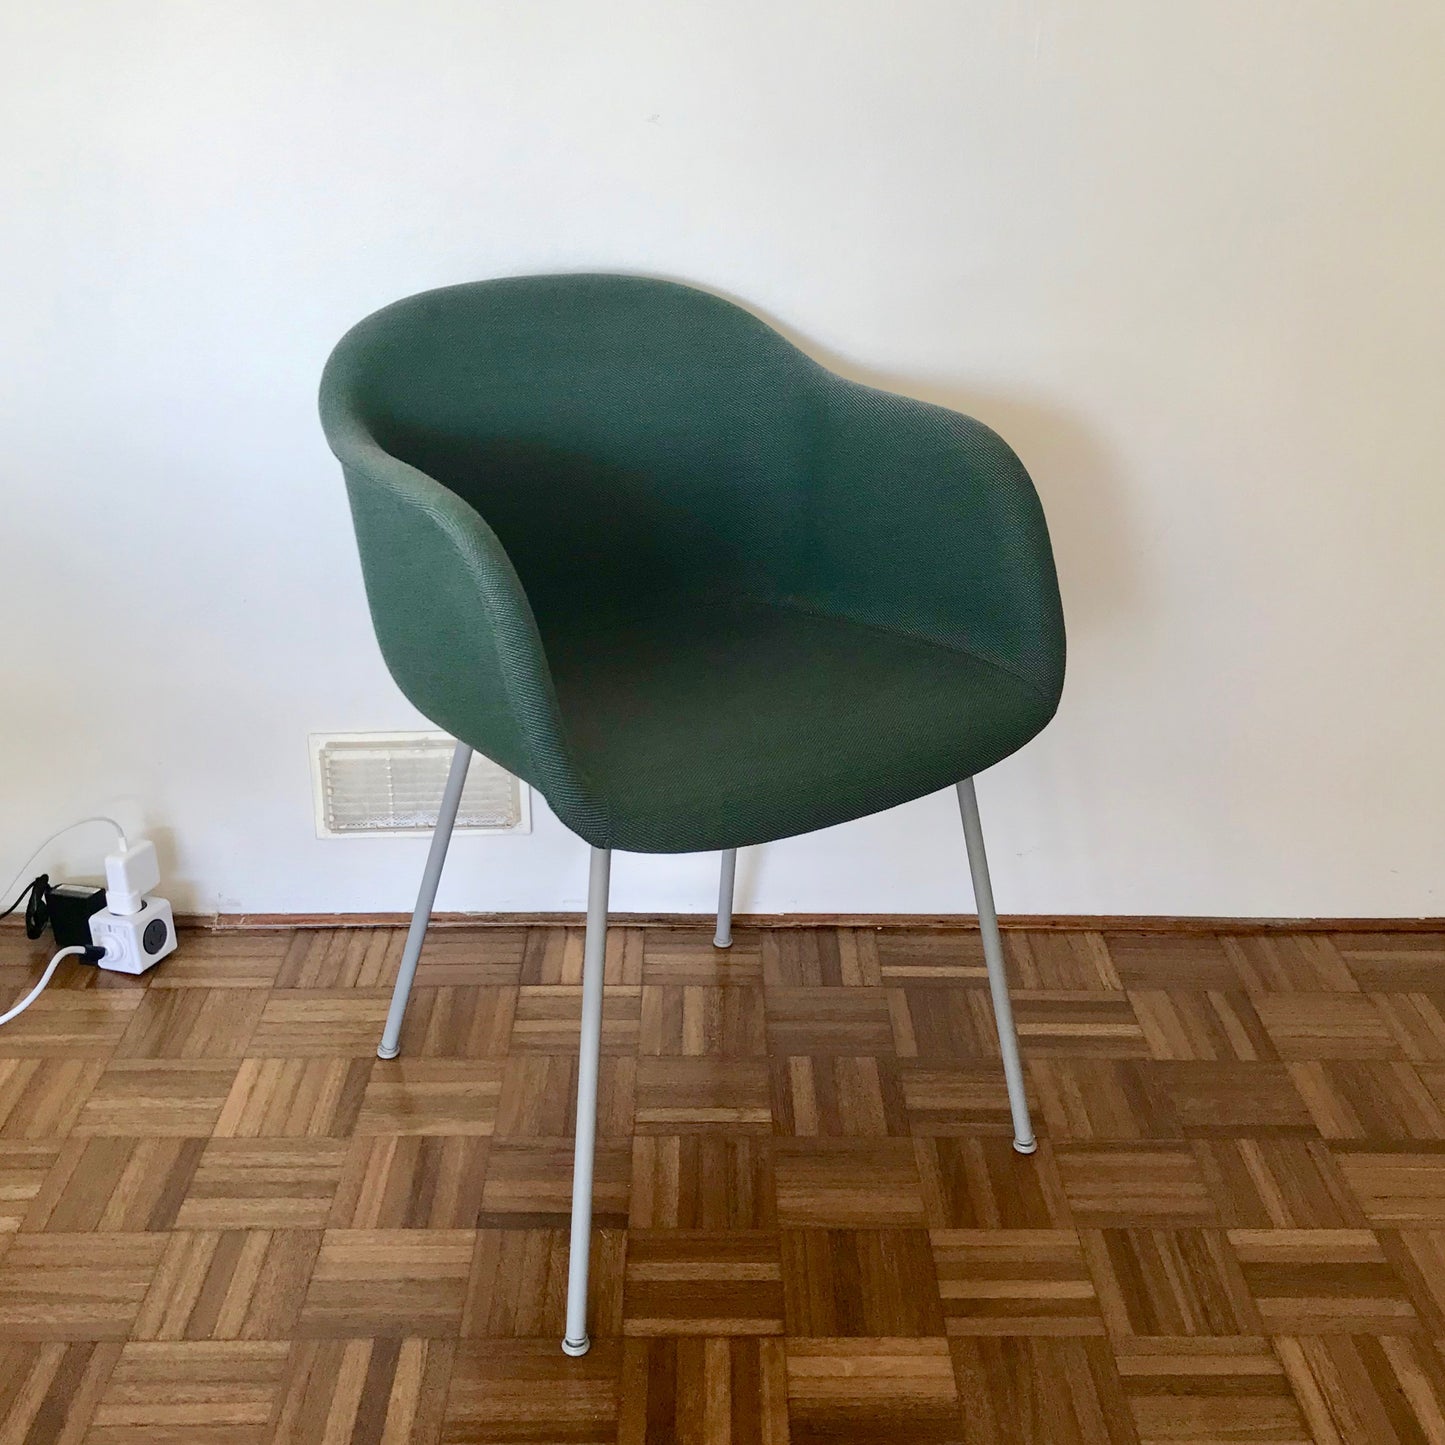 PAIR Fiber Chair with Tube Base by Iskos-Berlin for Muuto